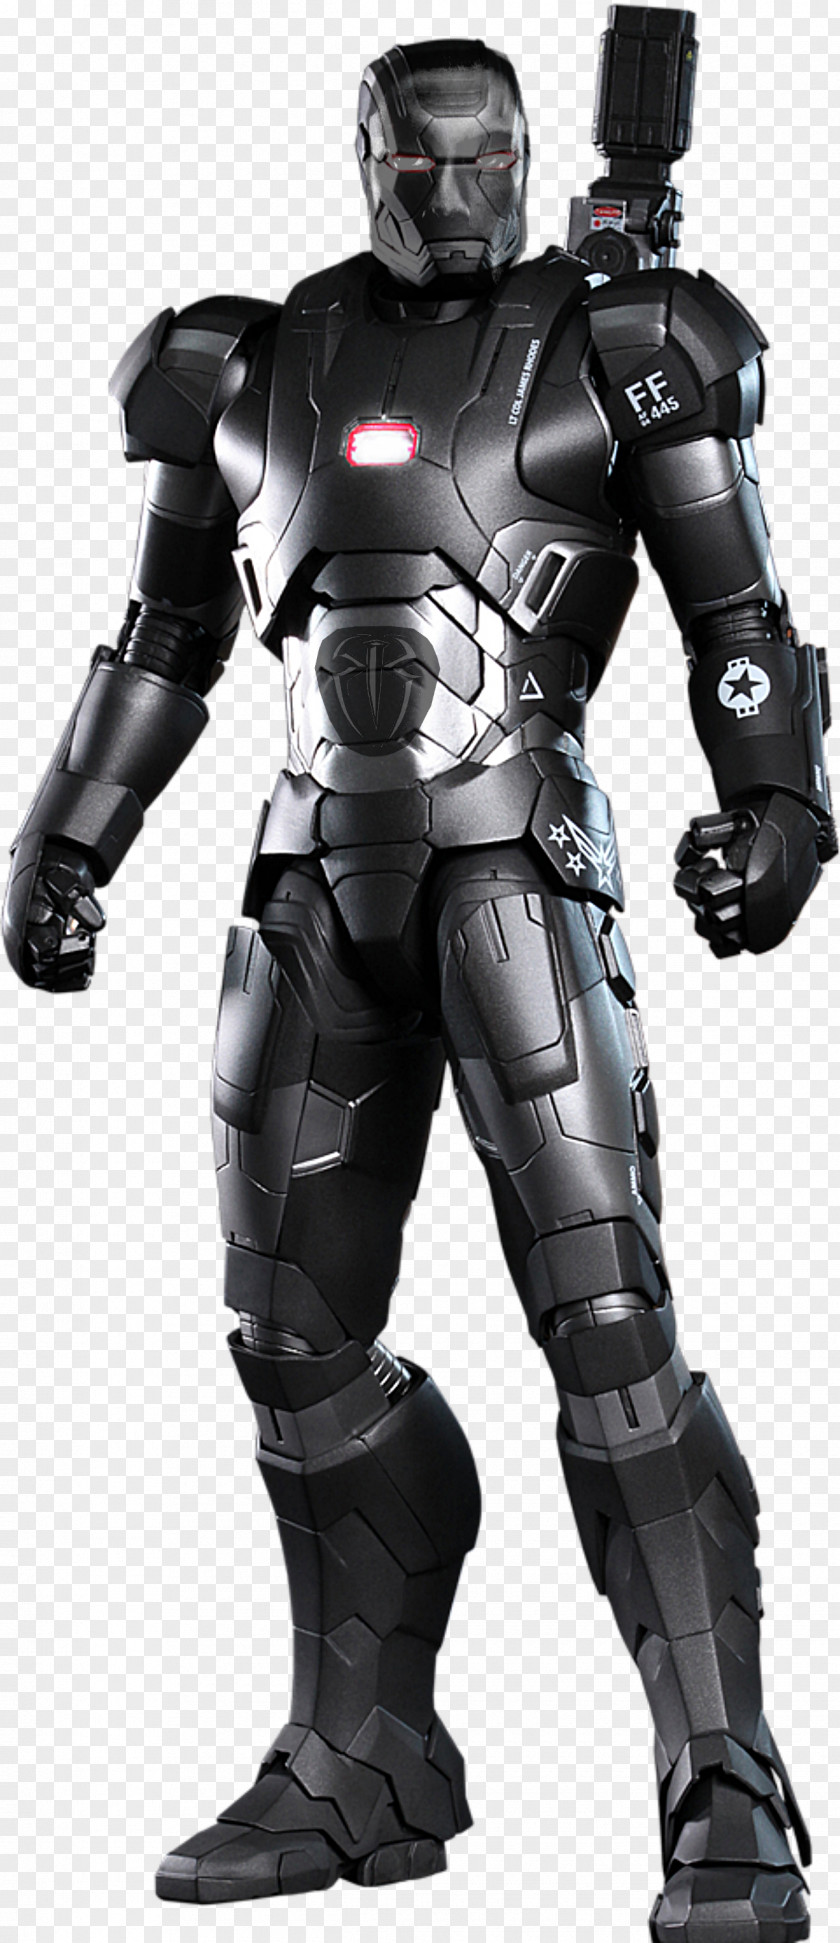 Ultron War Machine Iron Man's Armor Marvel Cinematic Universe Action & Toy Figures PNG